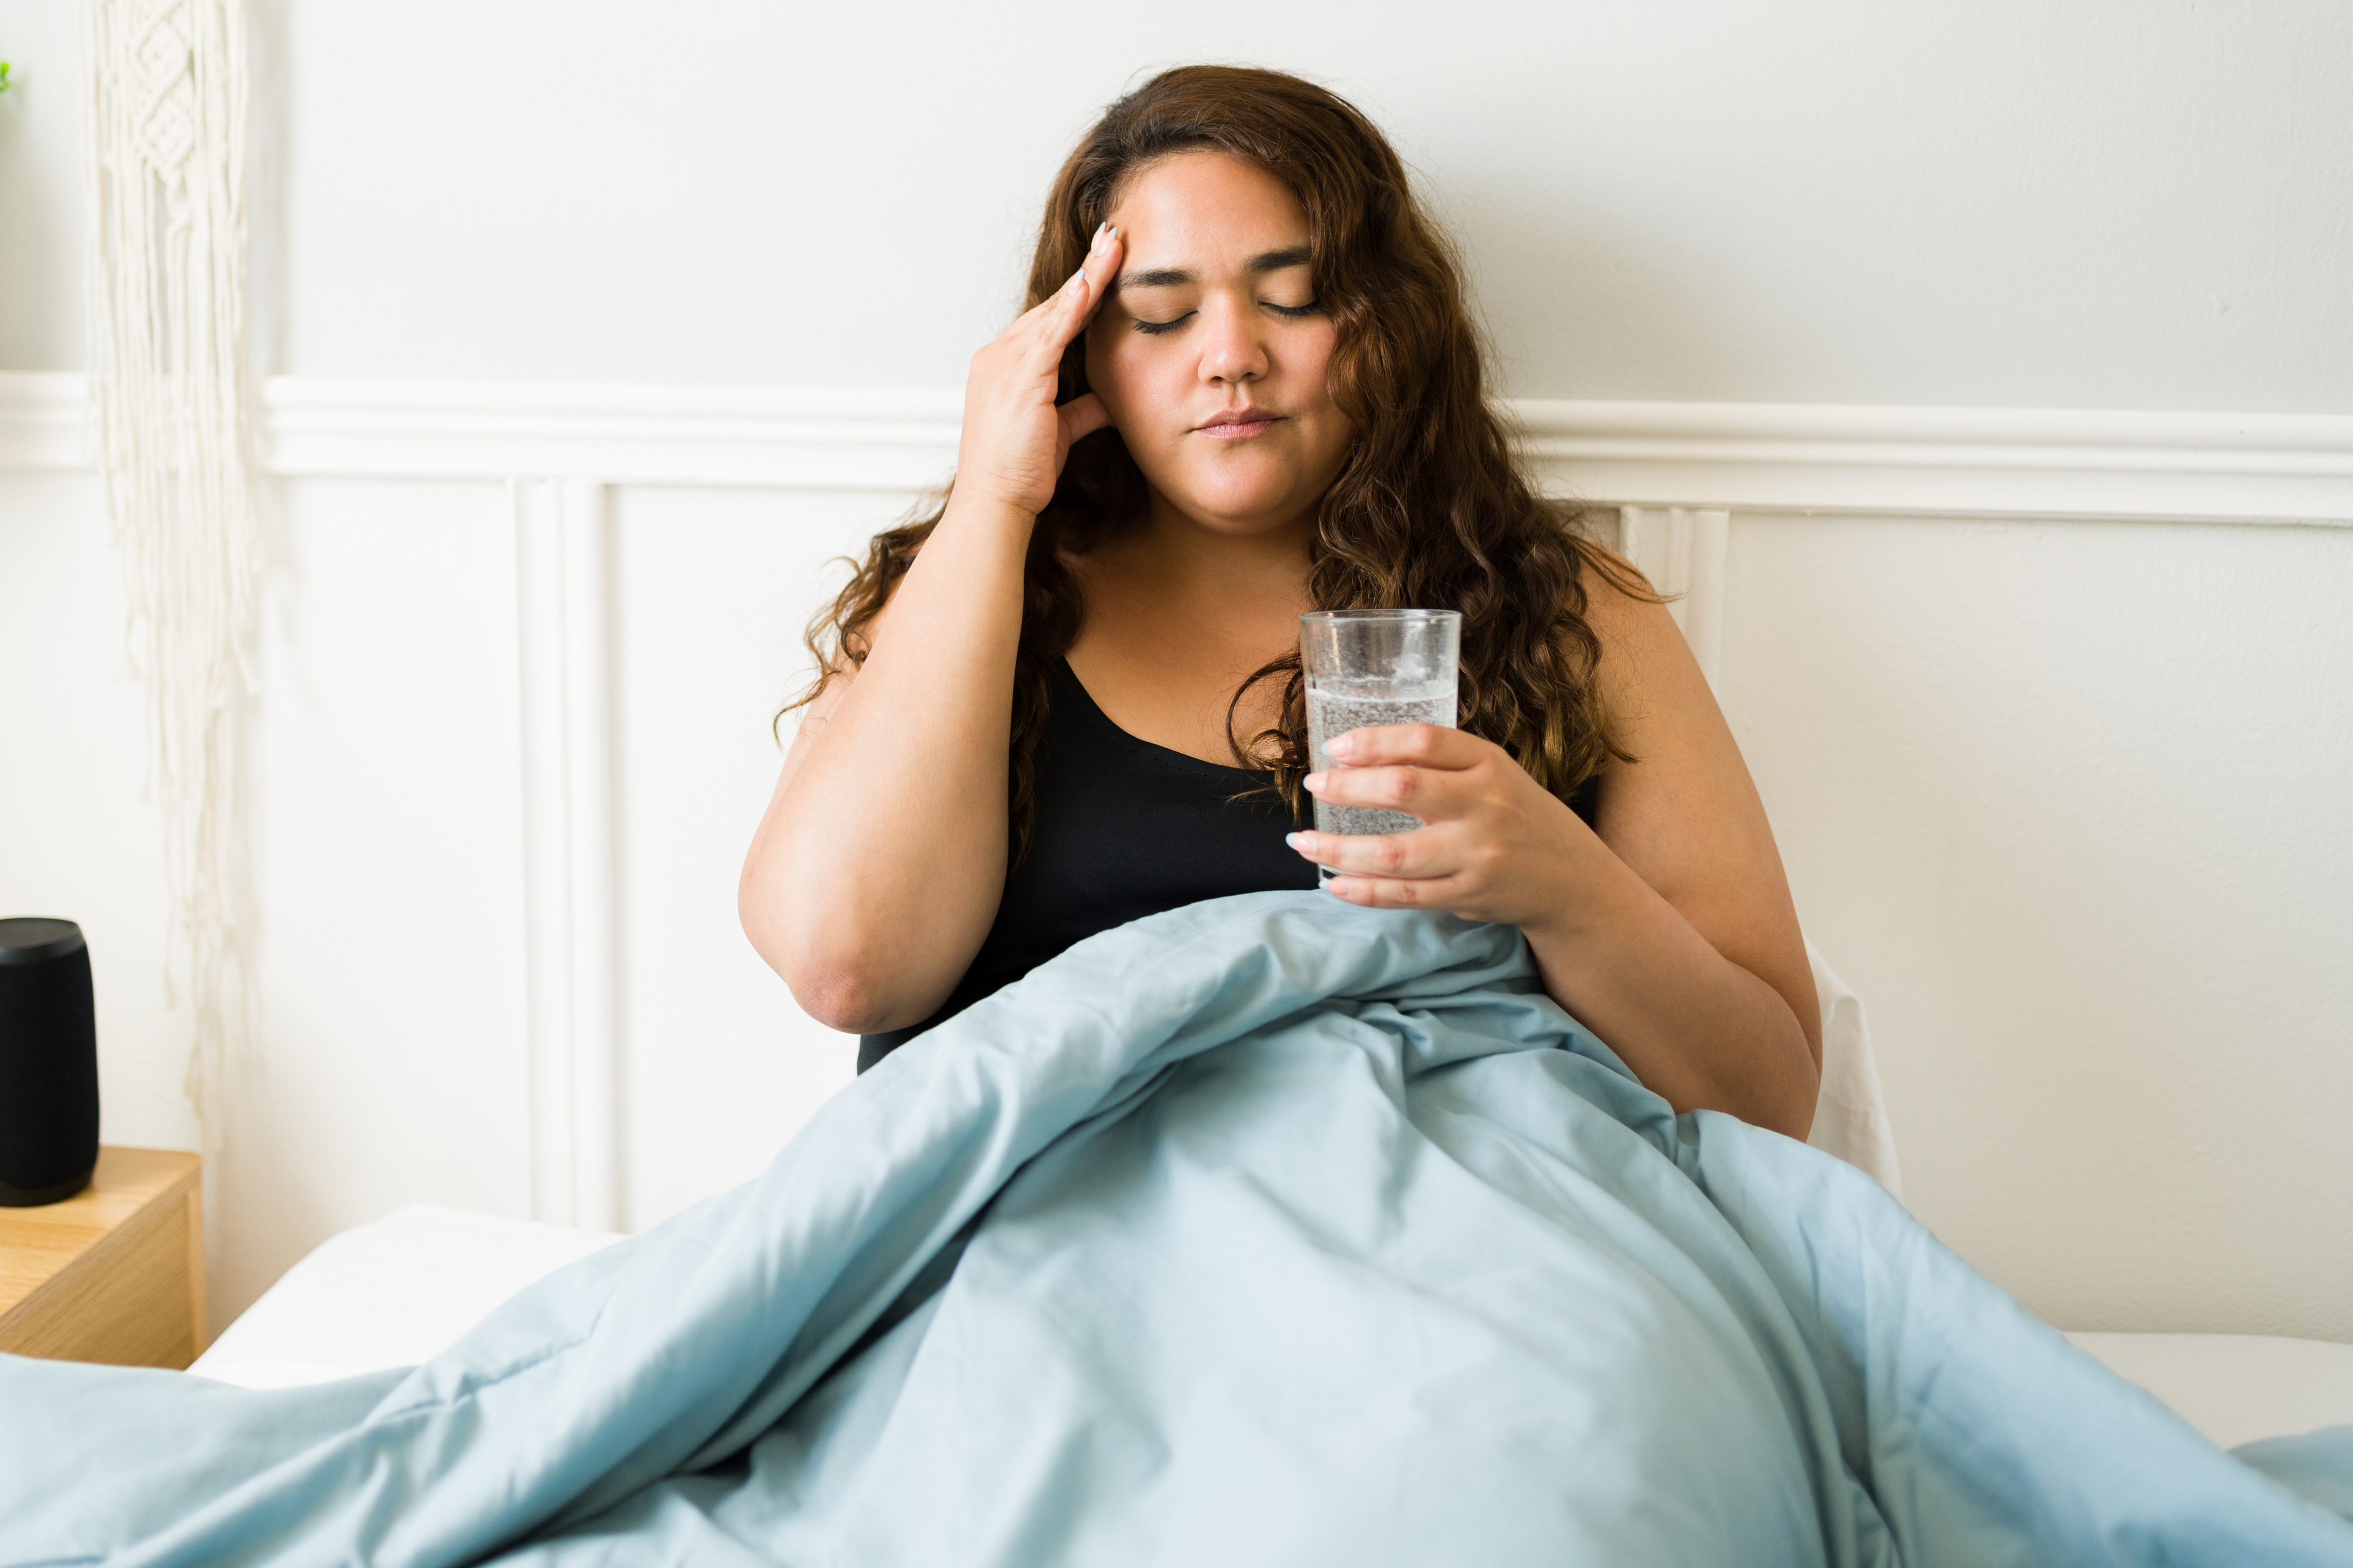 Person in bed holding a glass of water and touching head, appearing unwell